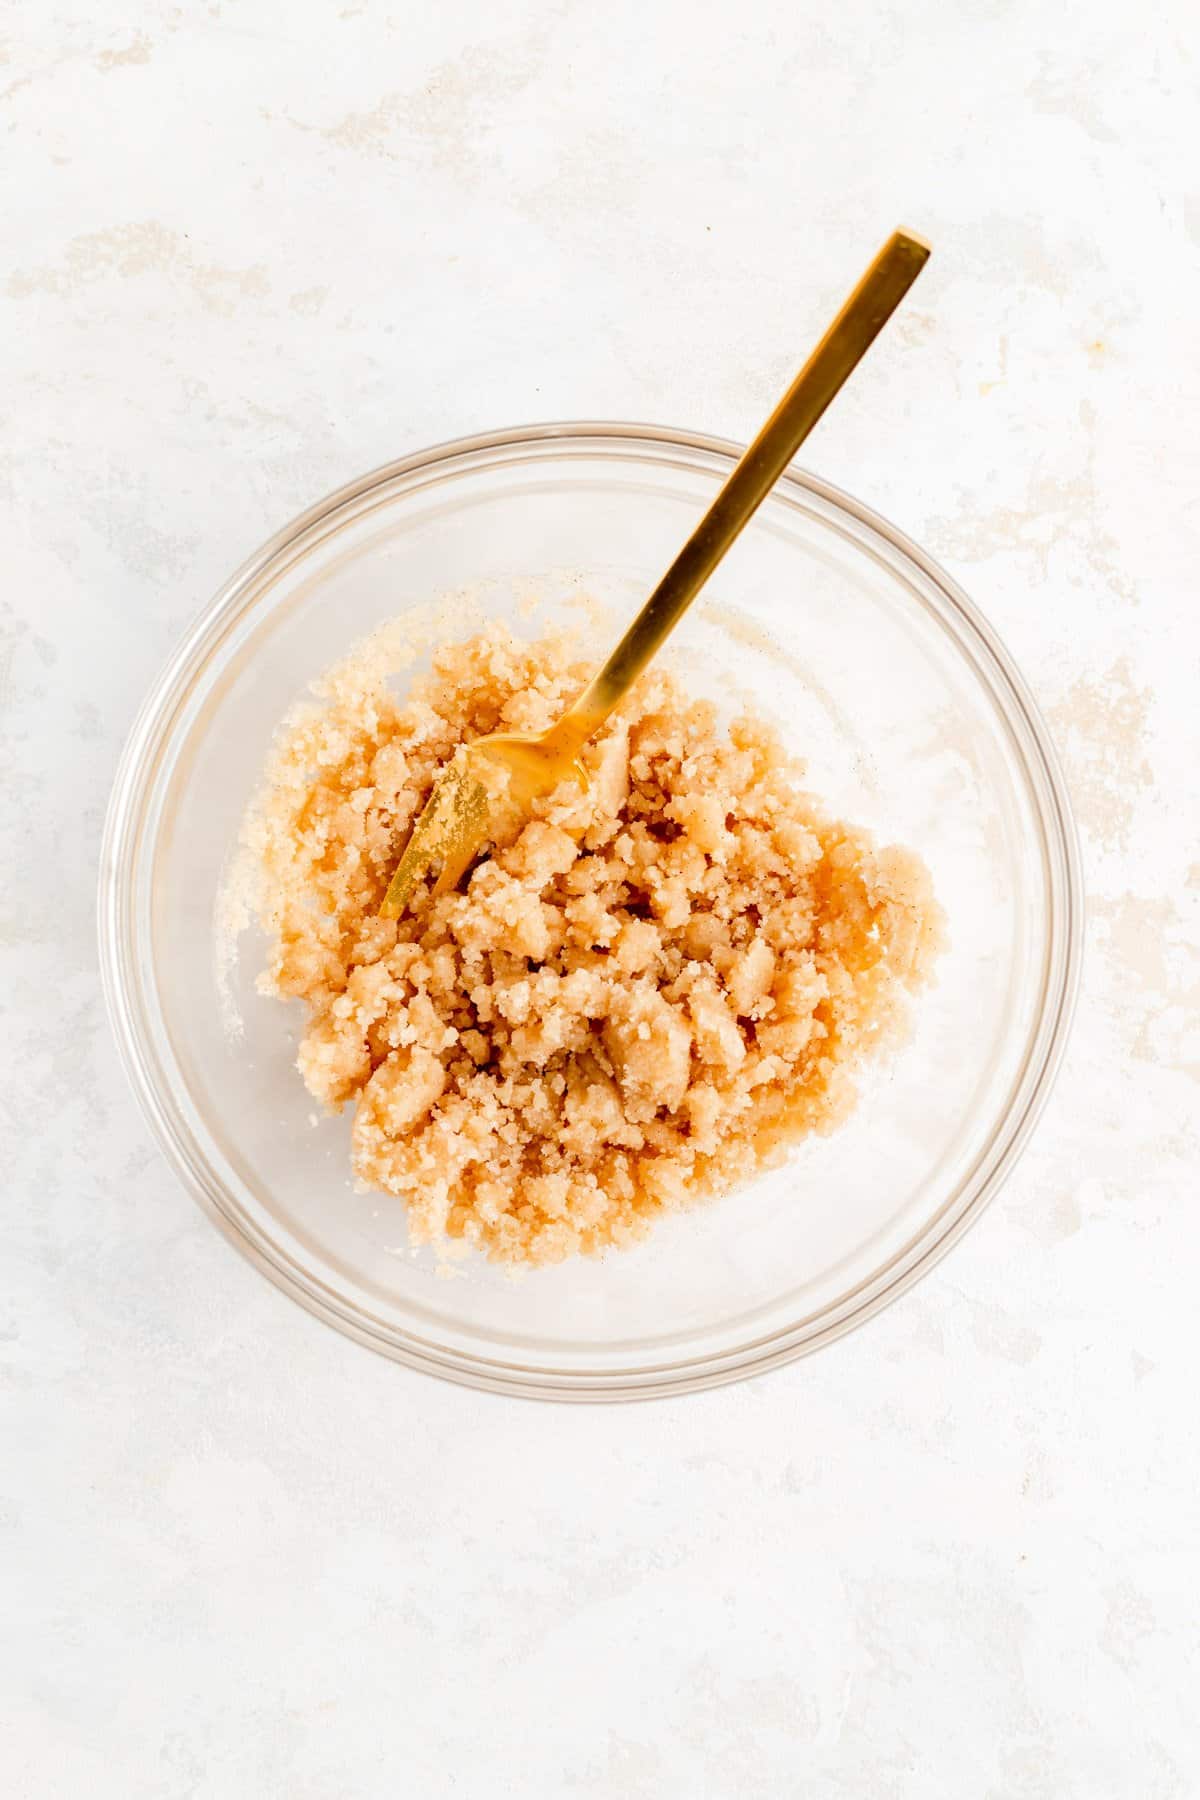 a bowl of cinnamon streusel topping with gold fork in it on white background.